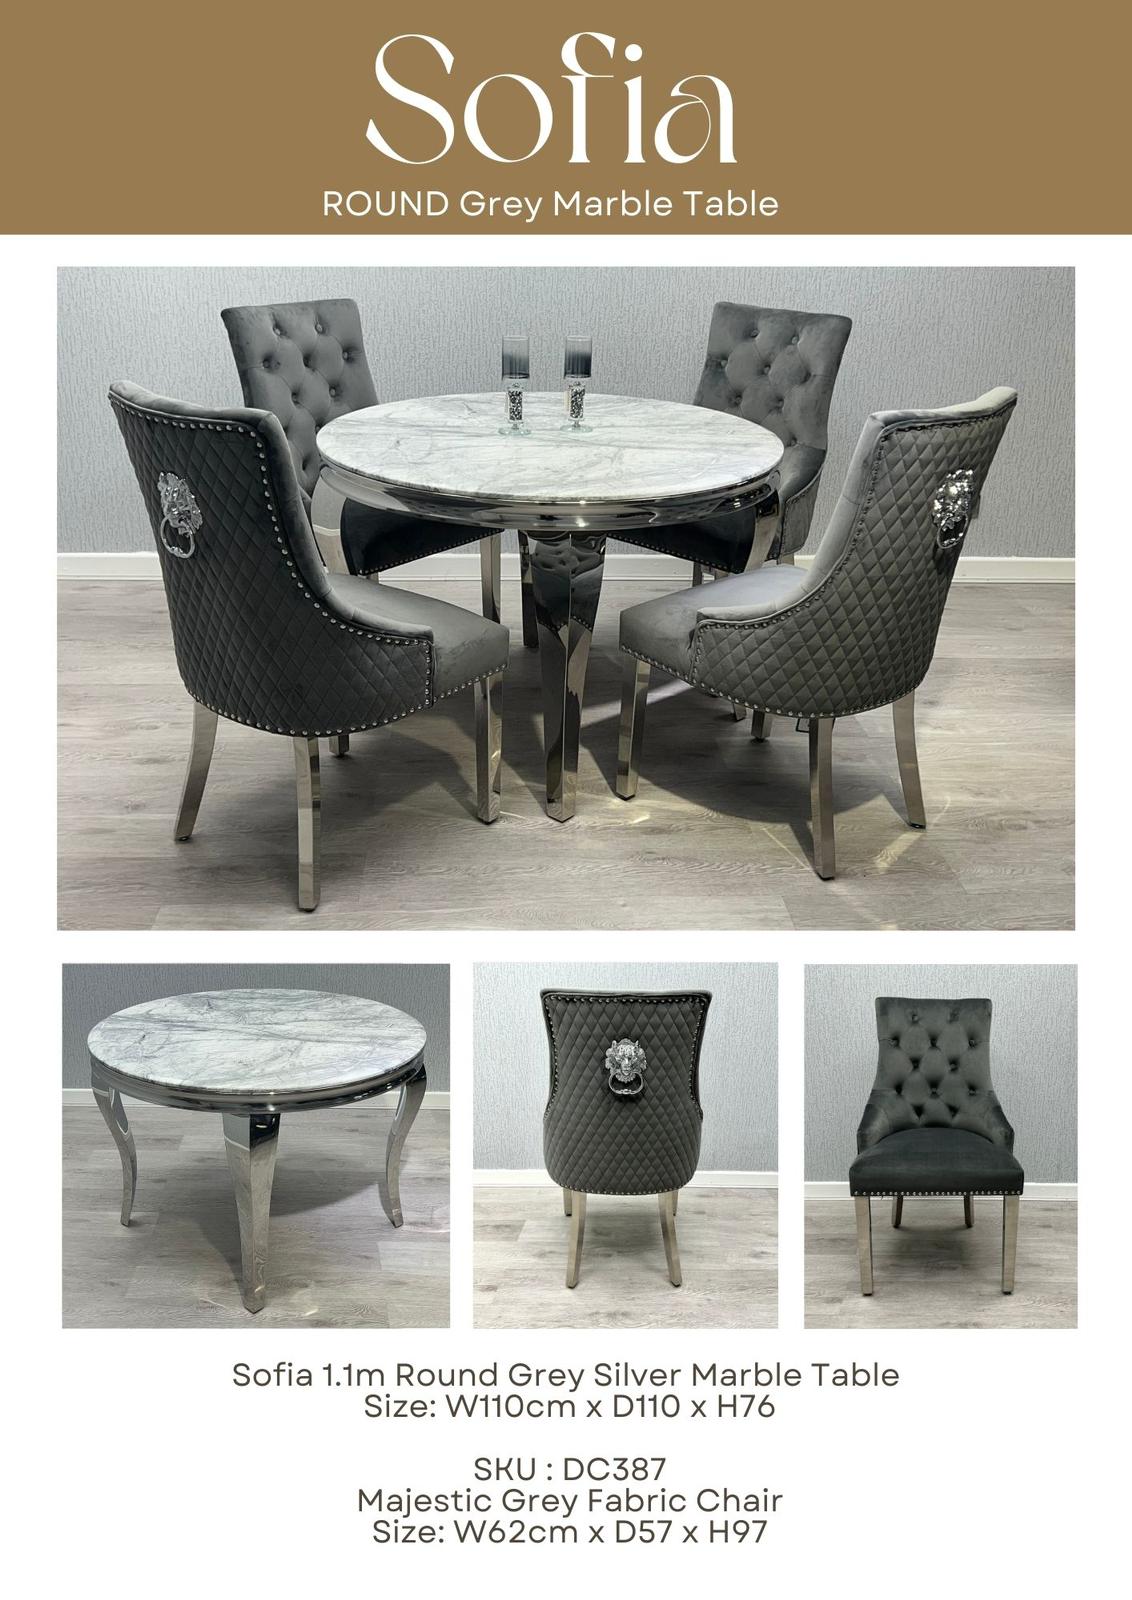 110x110cm Round Marble Table Light Grey With 4 Majestic Dark Grey Lion Knocker Chairs